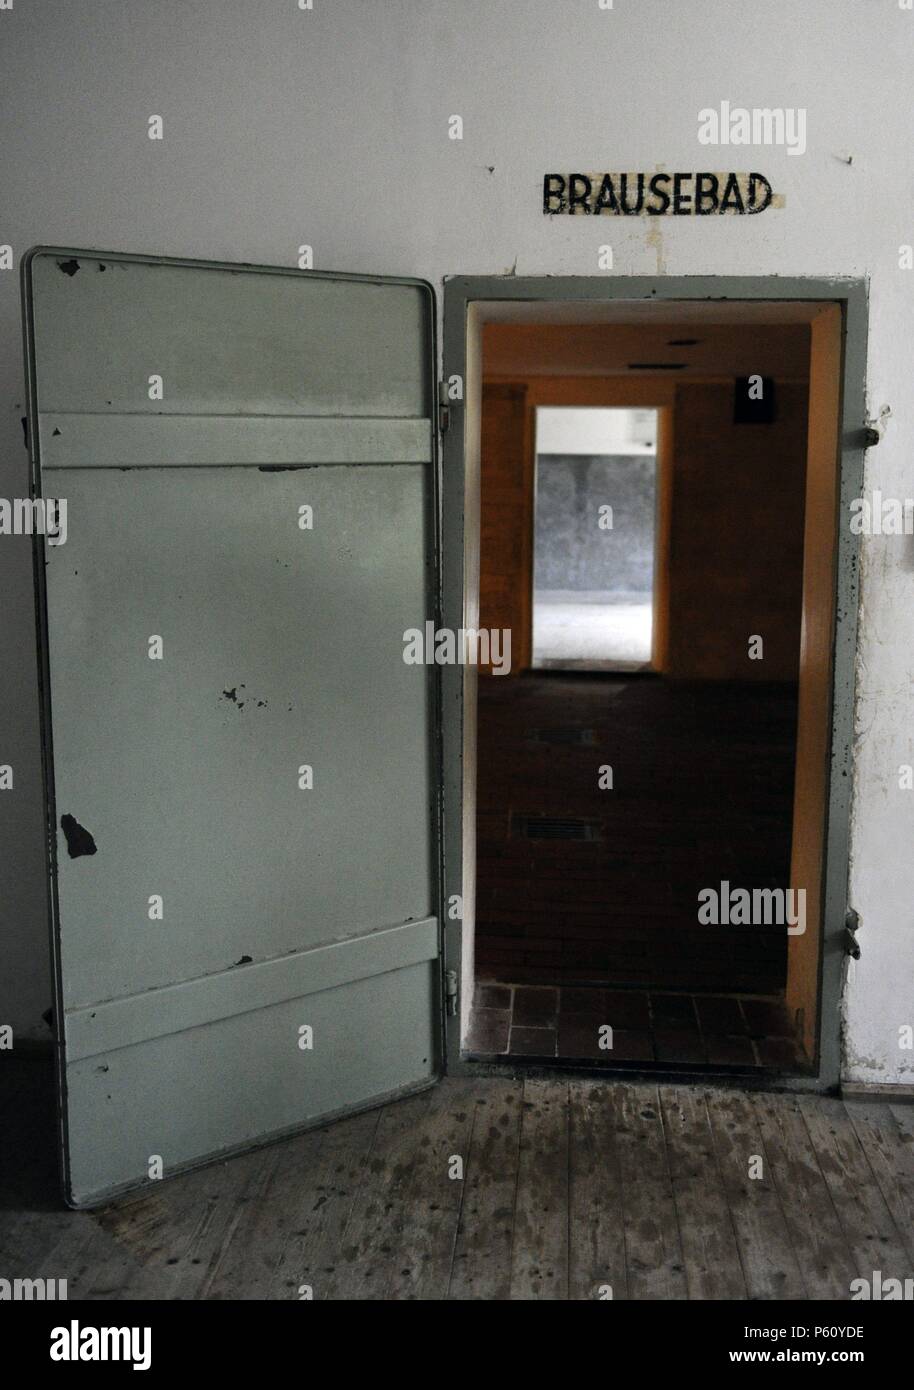 Dachau concentration camp. Fist of the Nazi concentration camps opened in Germany. Opened in 1933. Access door to the gas chamber. Disguised as 'brausebad' gang showers. Near Munich. Germany. Stock Photo